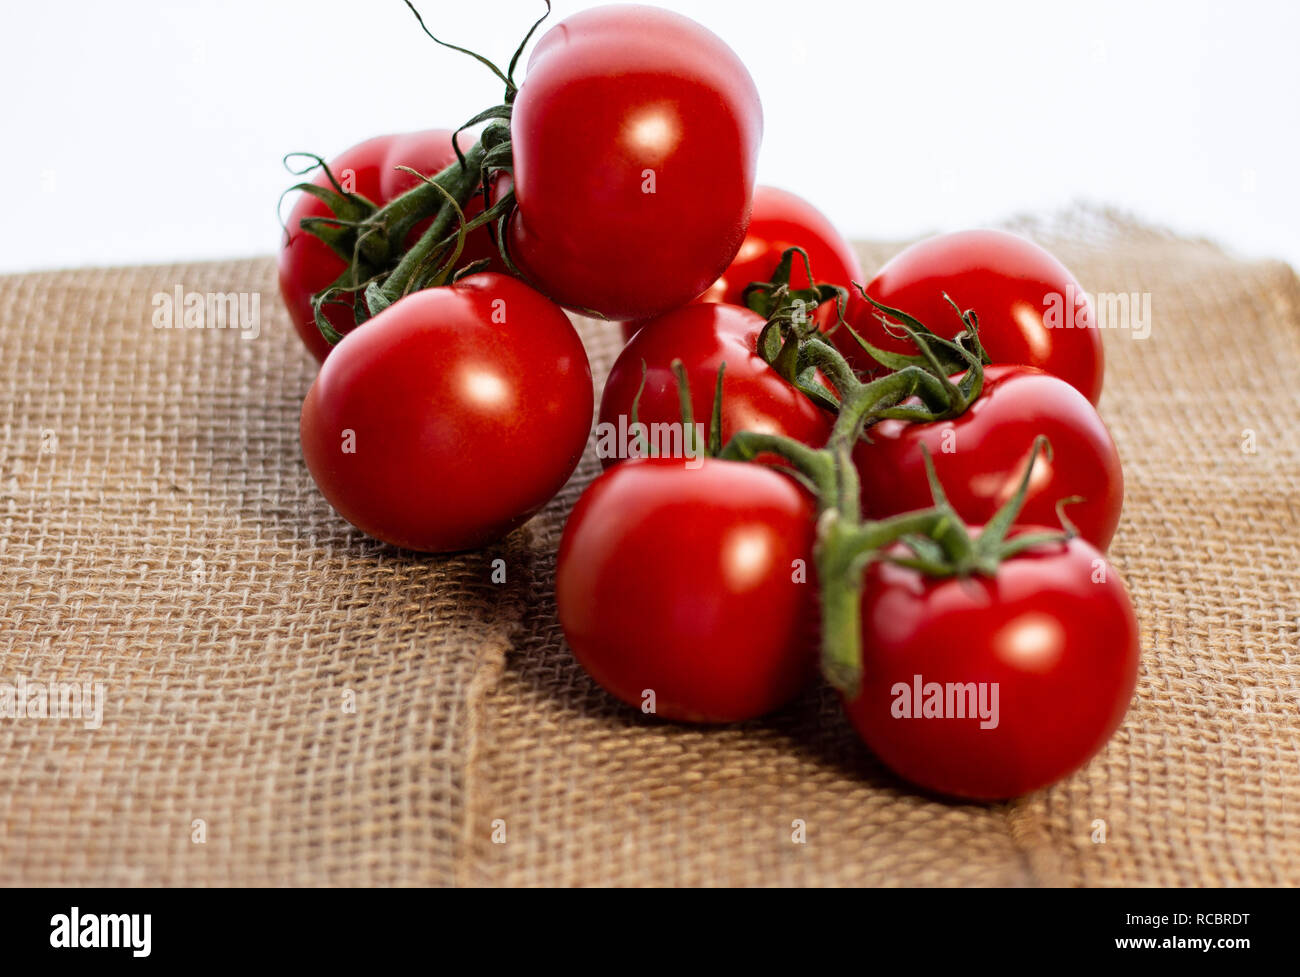 Bright red tomatoes add a burst of color. Stock Photo